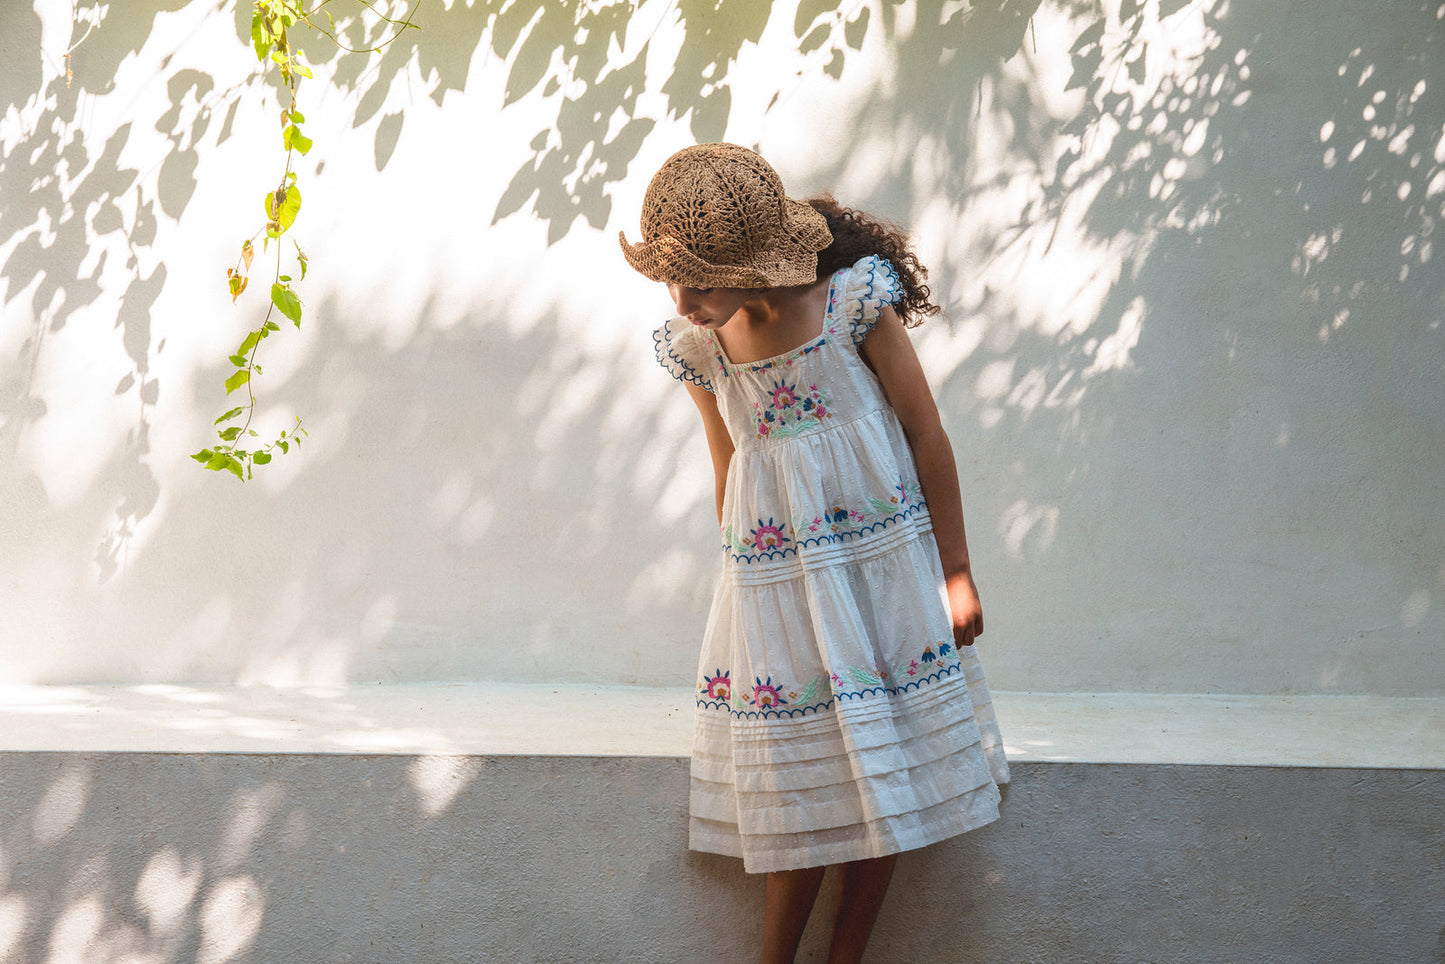 Lali Kids Nanette Dress in Pearl With Embroidery